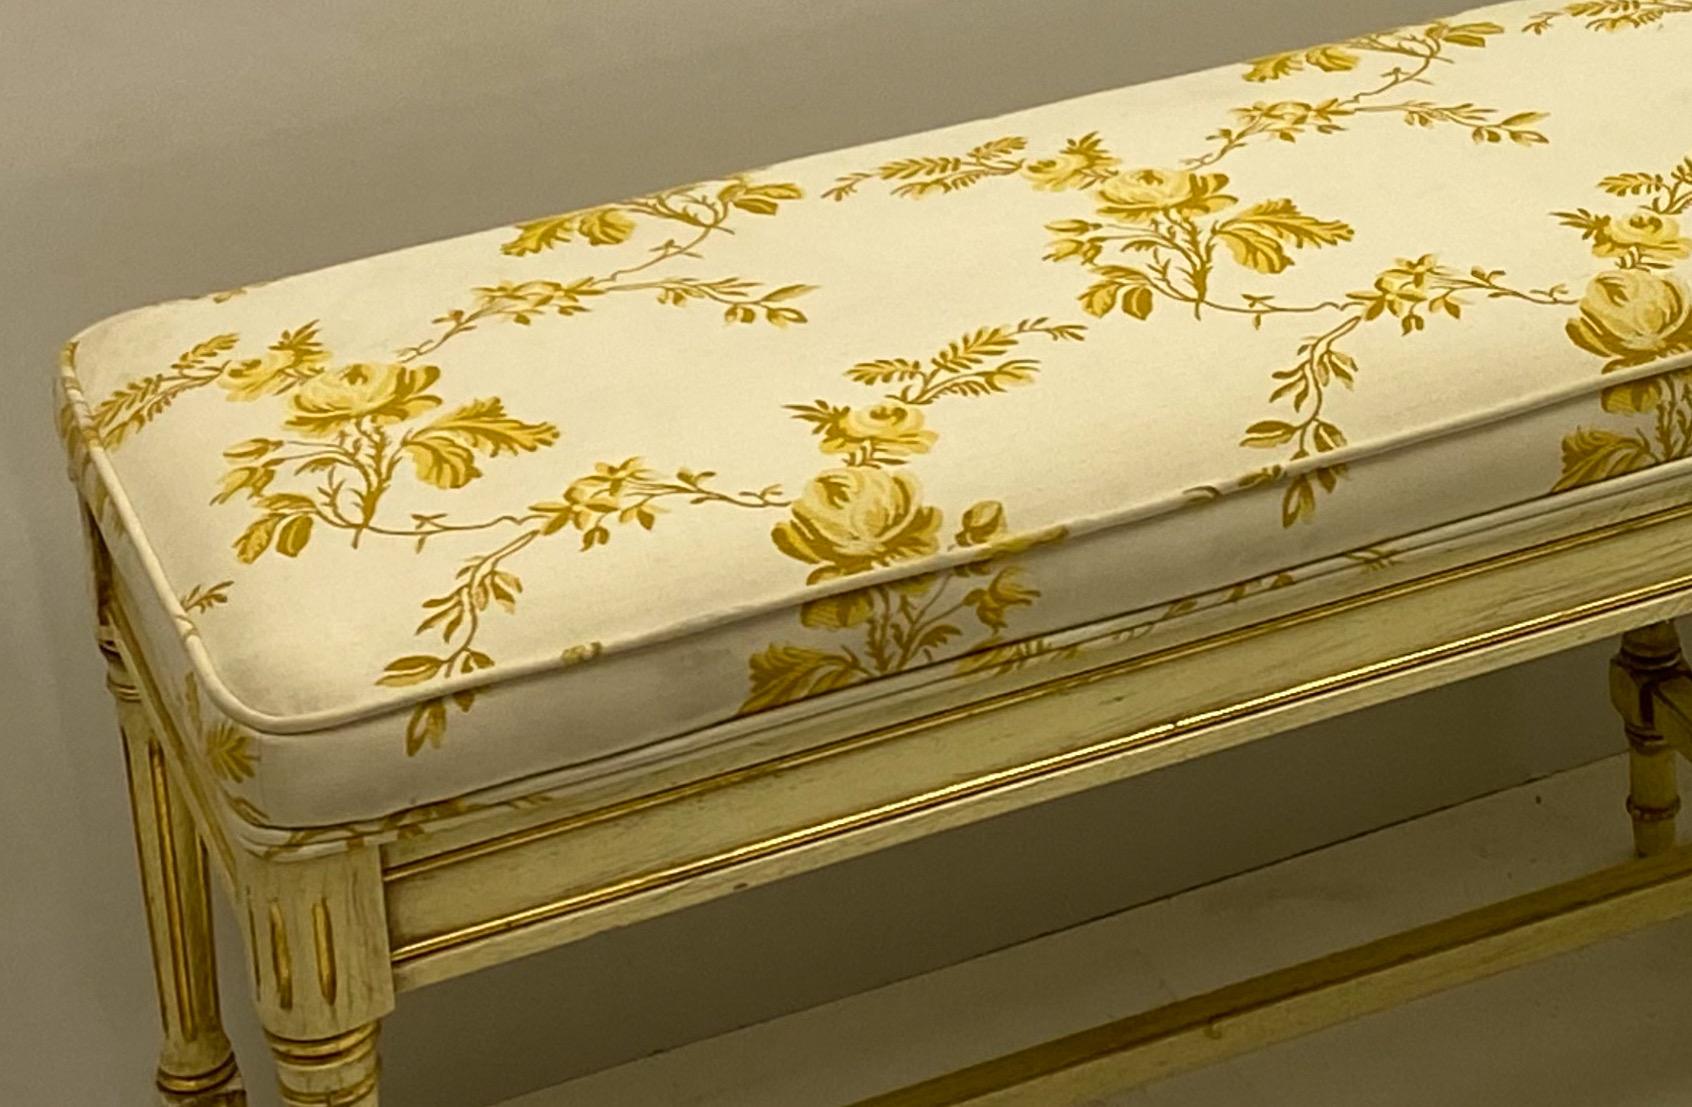 French Provincial Midcentury French Claude Moulin Floral Upholstered Bench / Ottoman